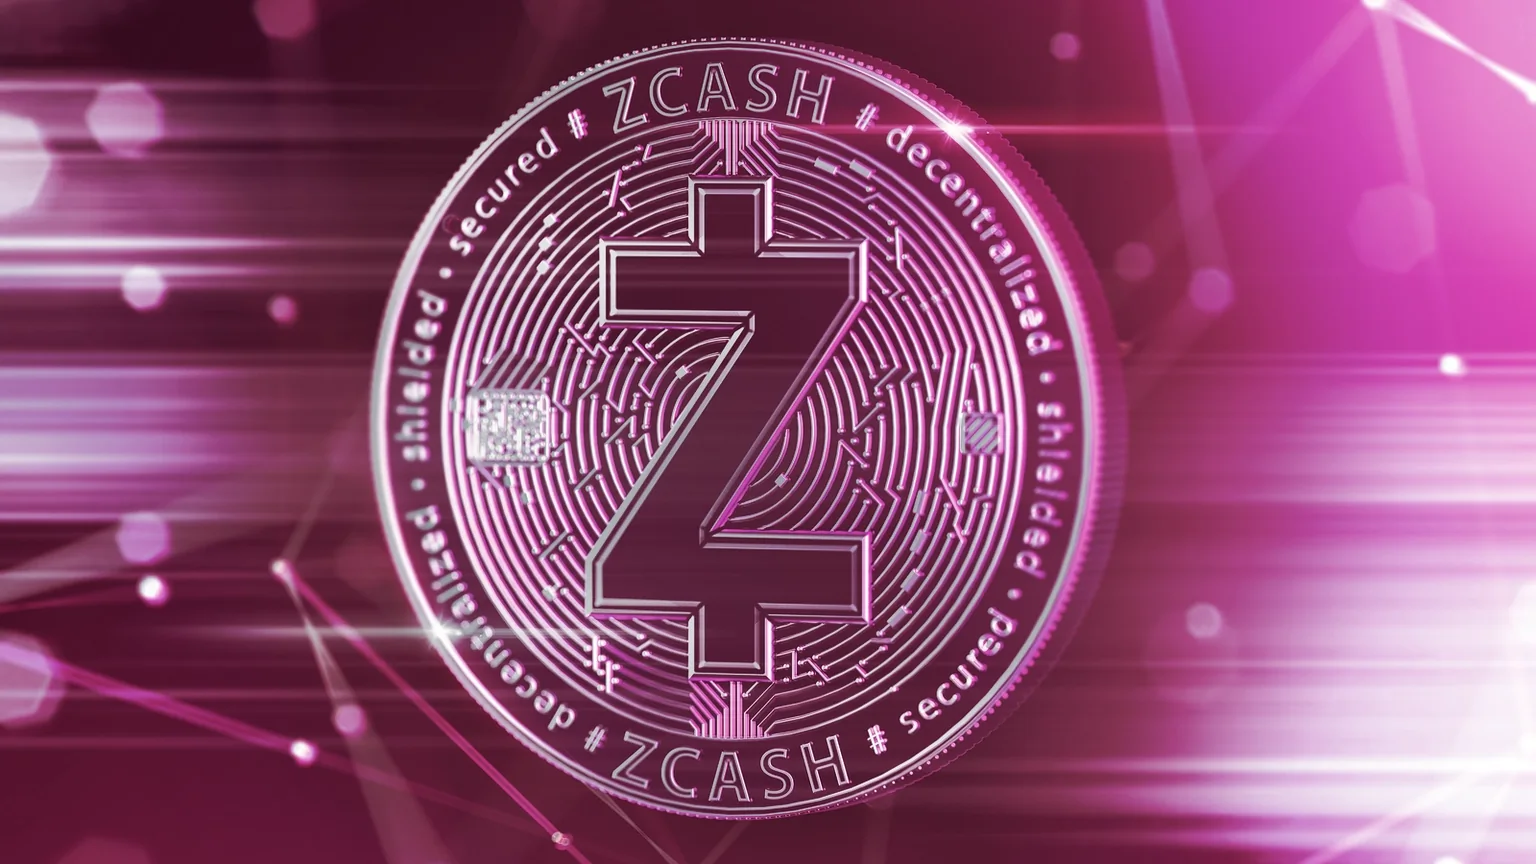 Zcash (ZEC) is a privacy-focused cryptocurrency. Image: Shutterstock